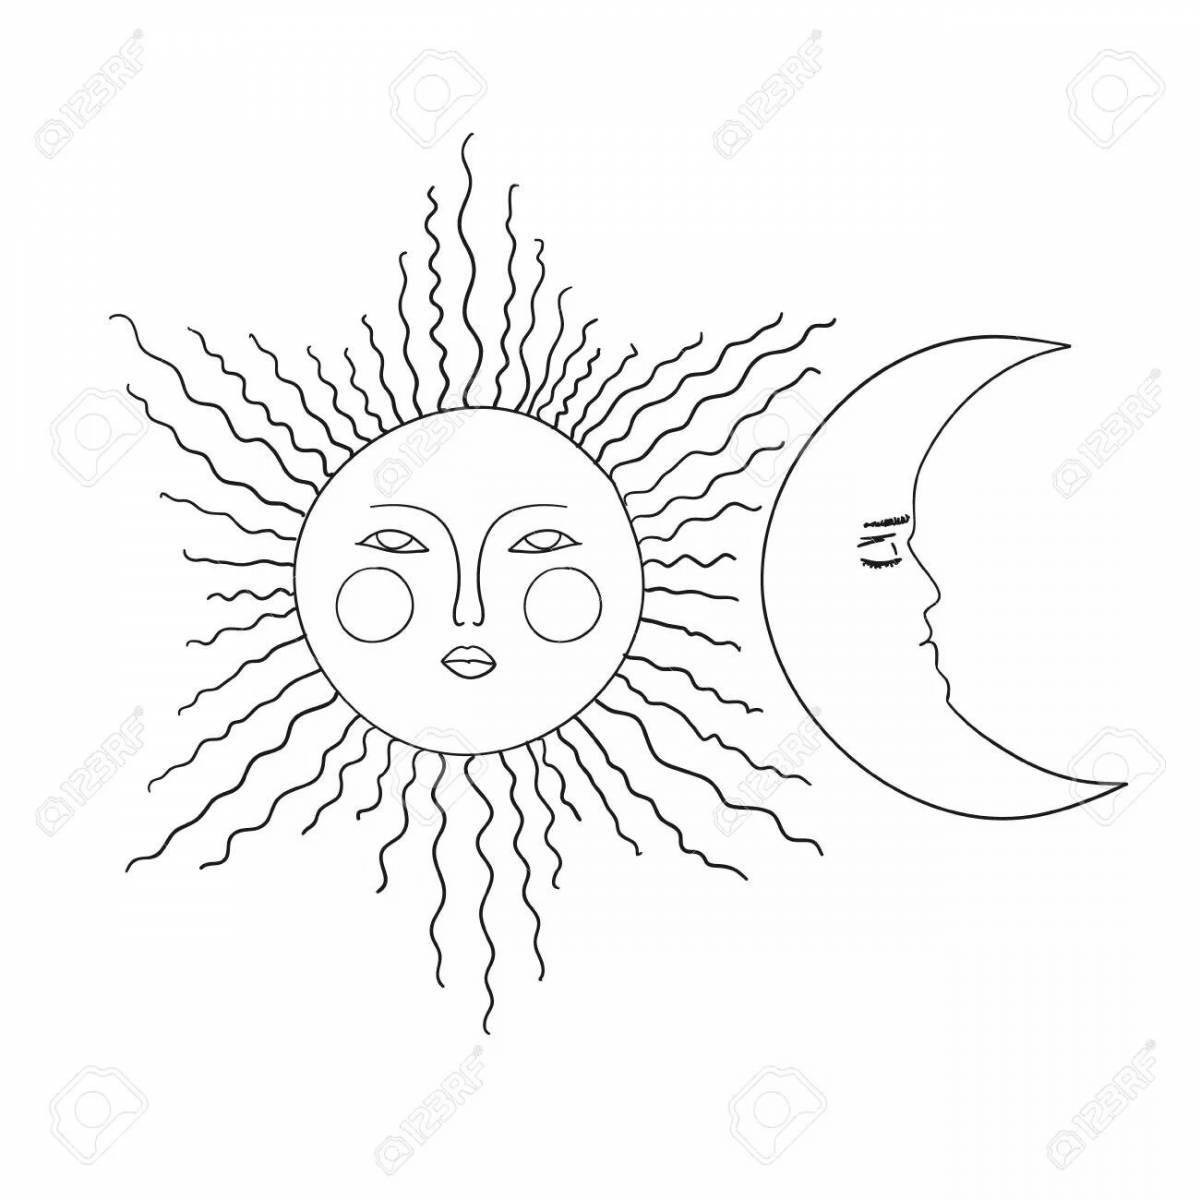 Fun coloring book moon and sun for kids